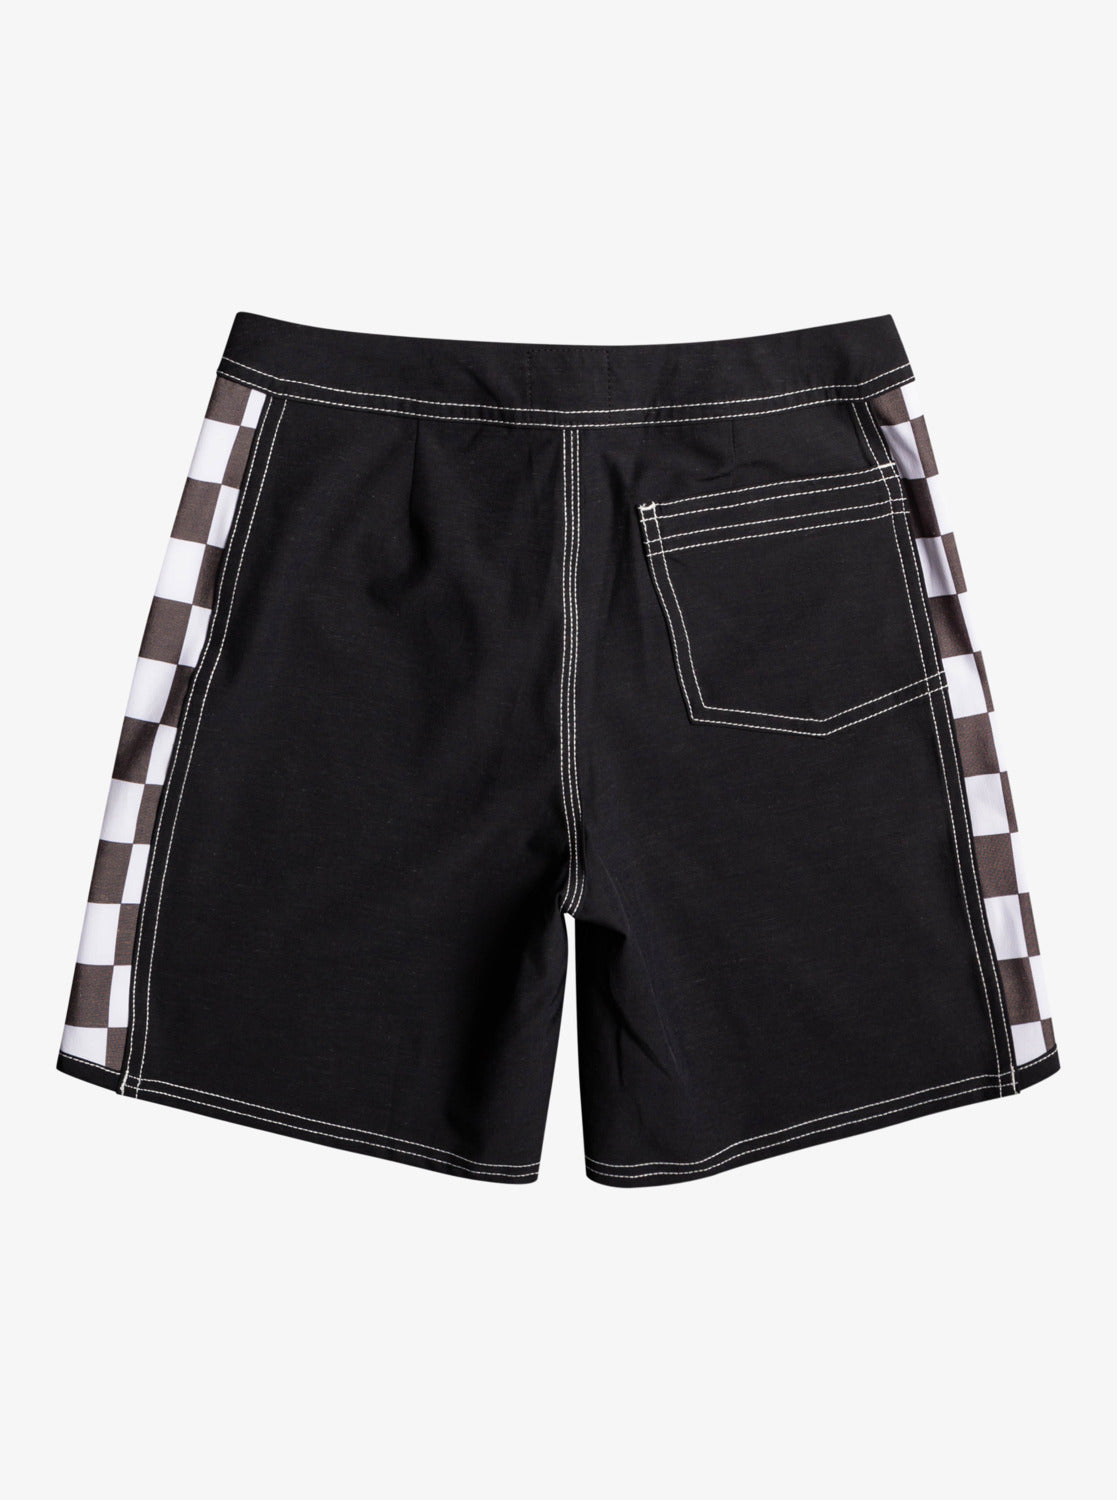 Quiksilver Original Arch Youth